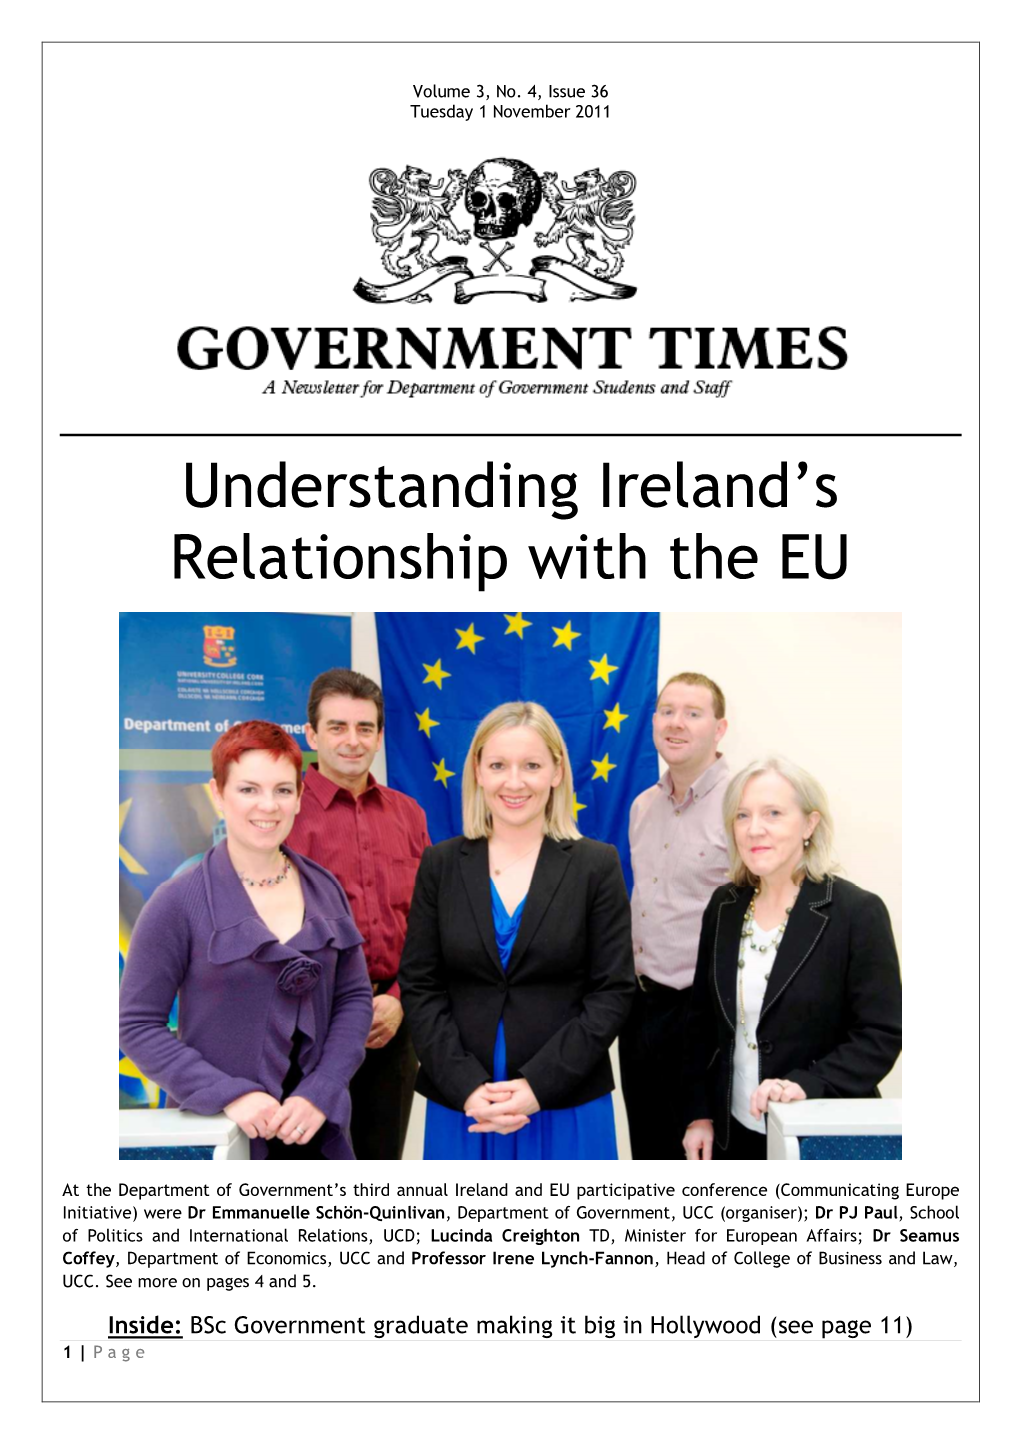 Government Times, Issue 36